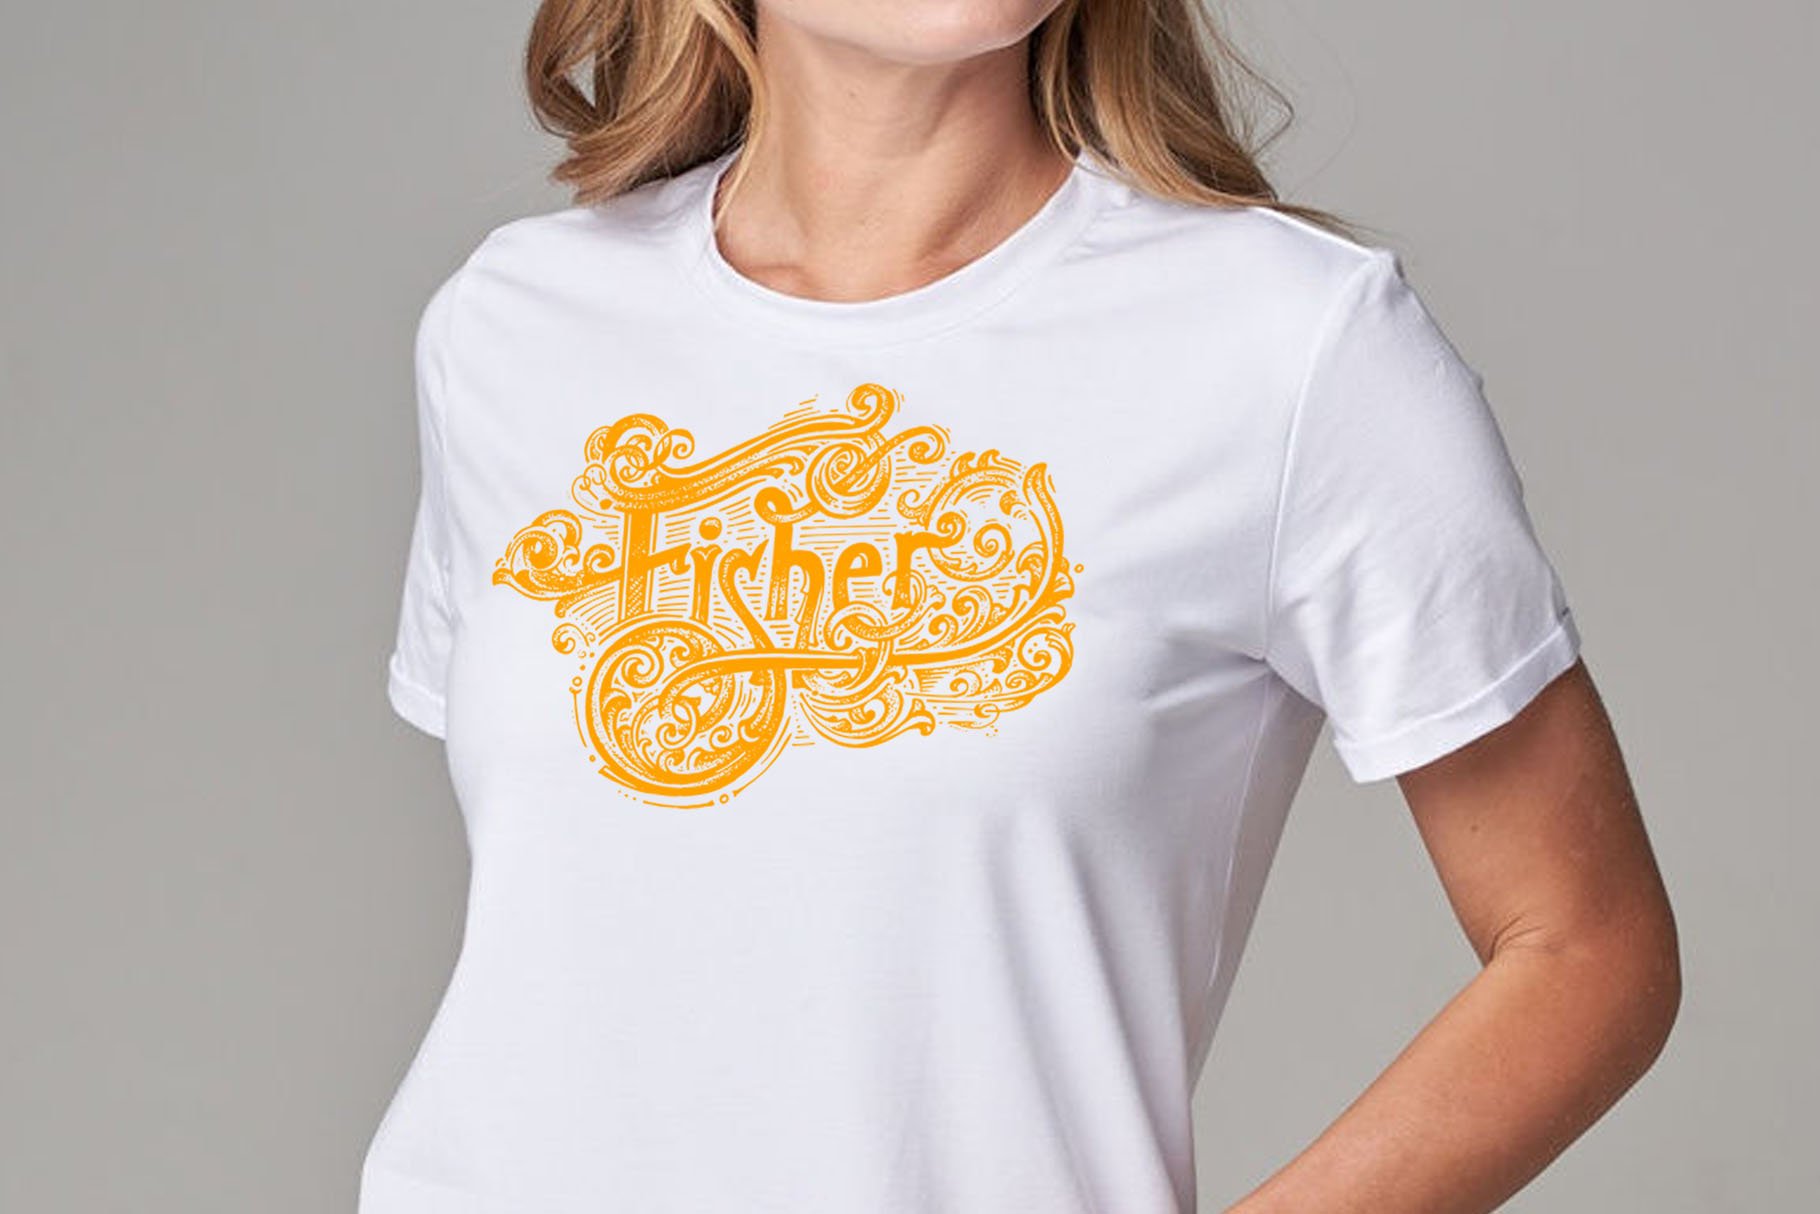 Classic white t-shirt with yellow fisher illustration.